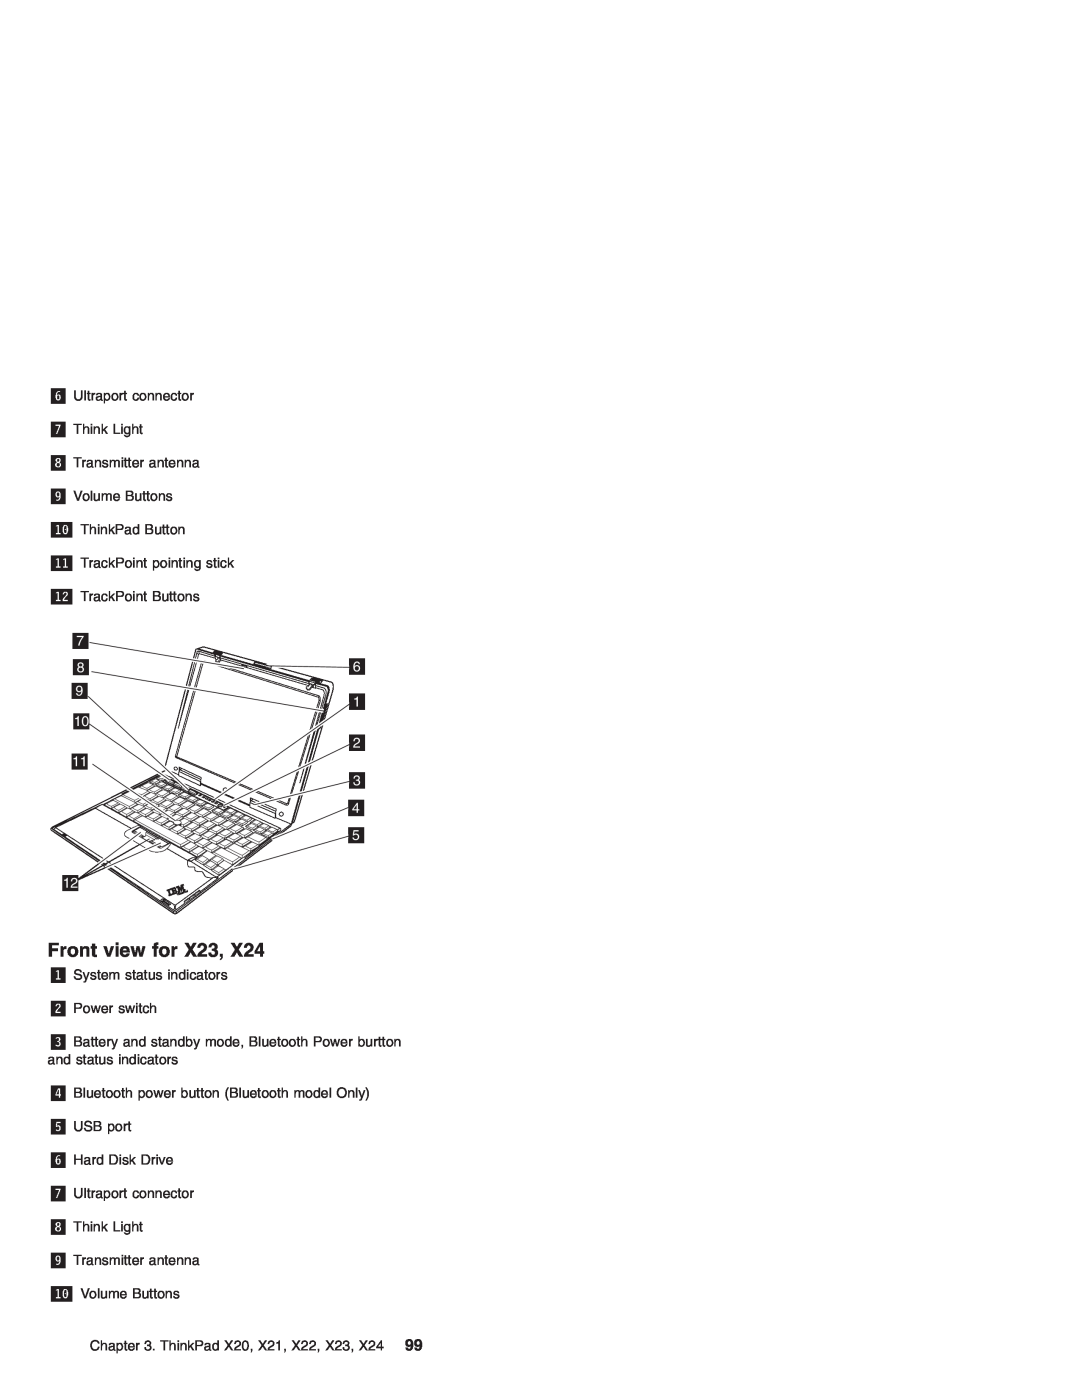 IBM X20, X24, X22, X21 manual Front view for X23 